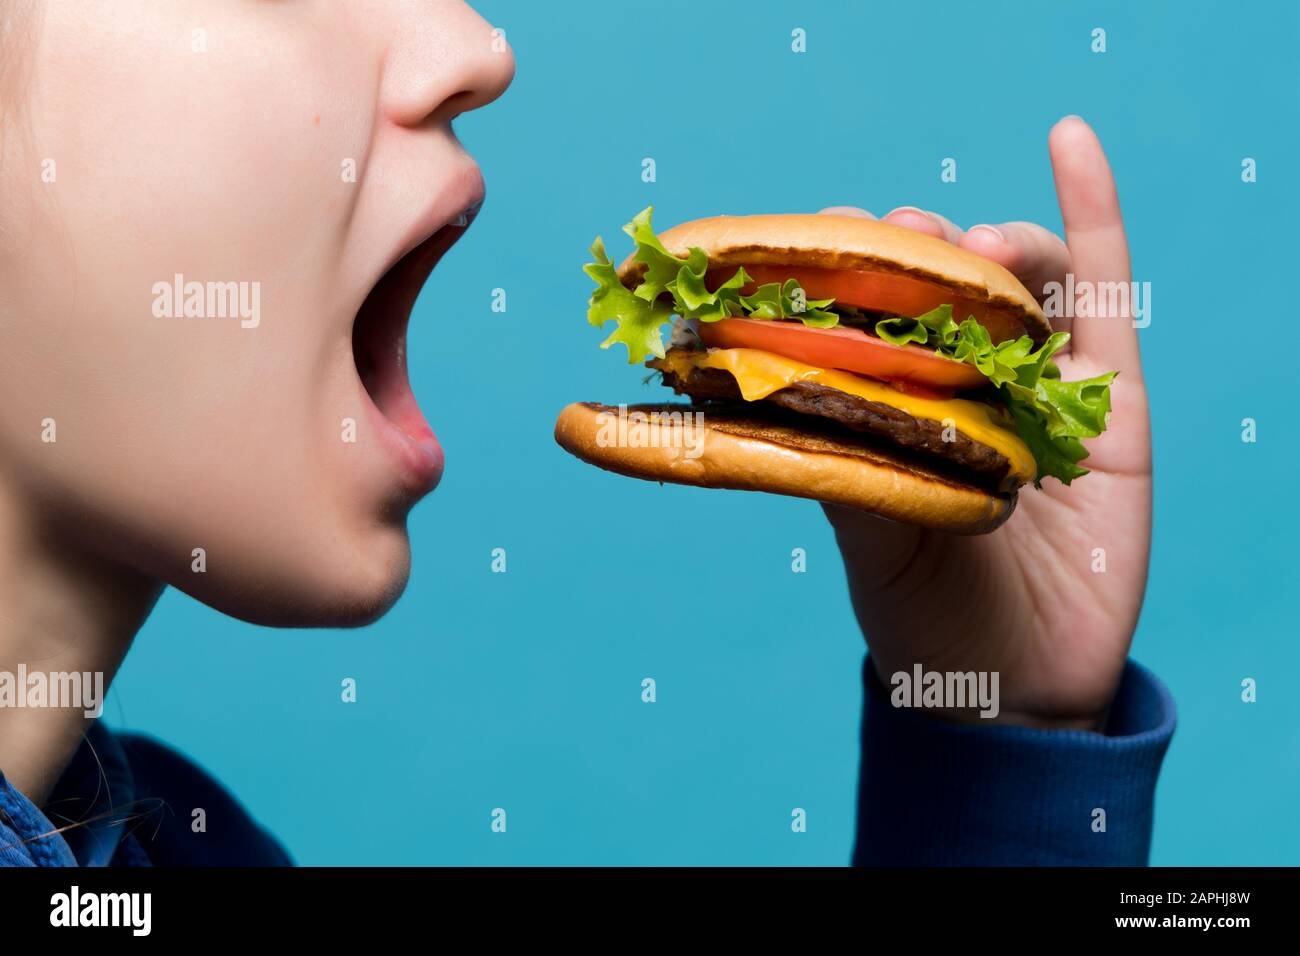 close-up of how a burger goes into a girl's mouth, side view Stock Photo